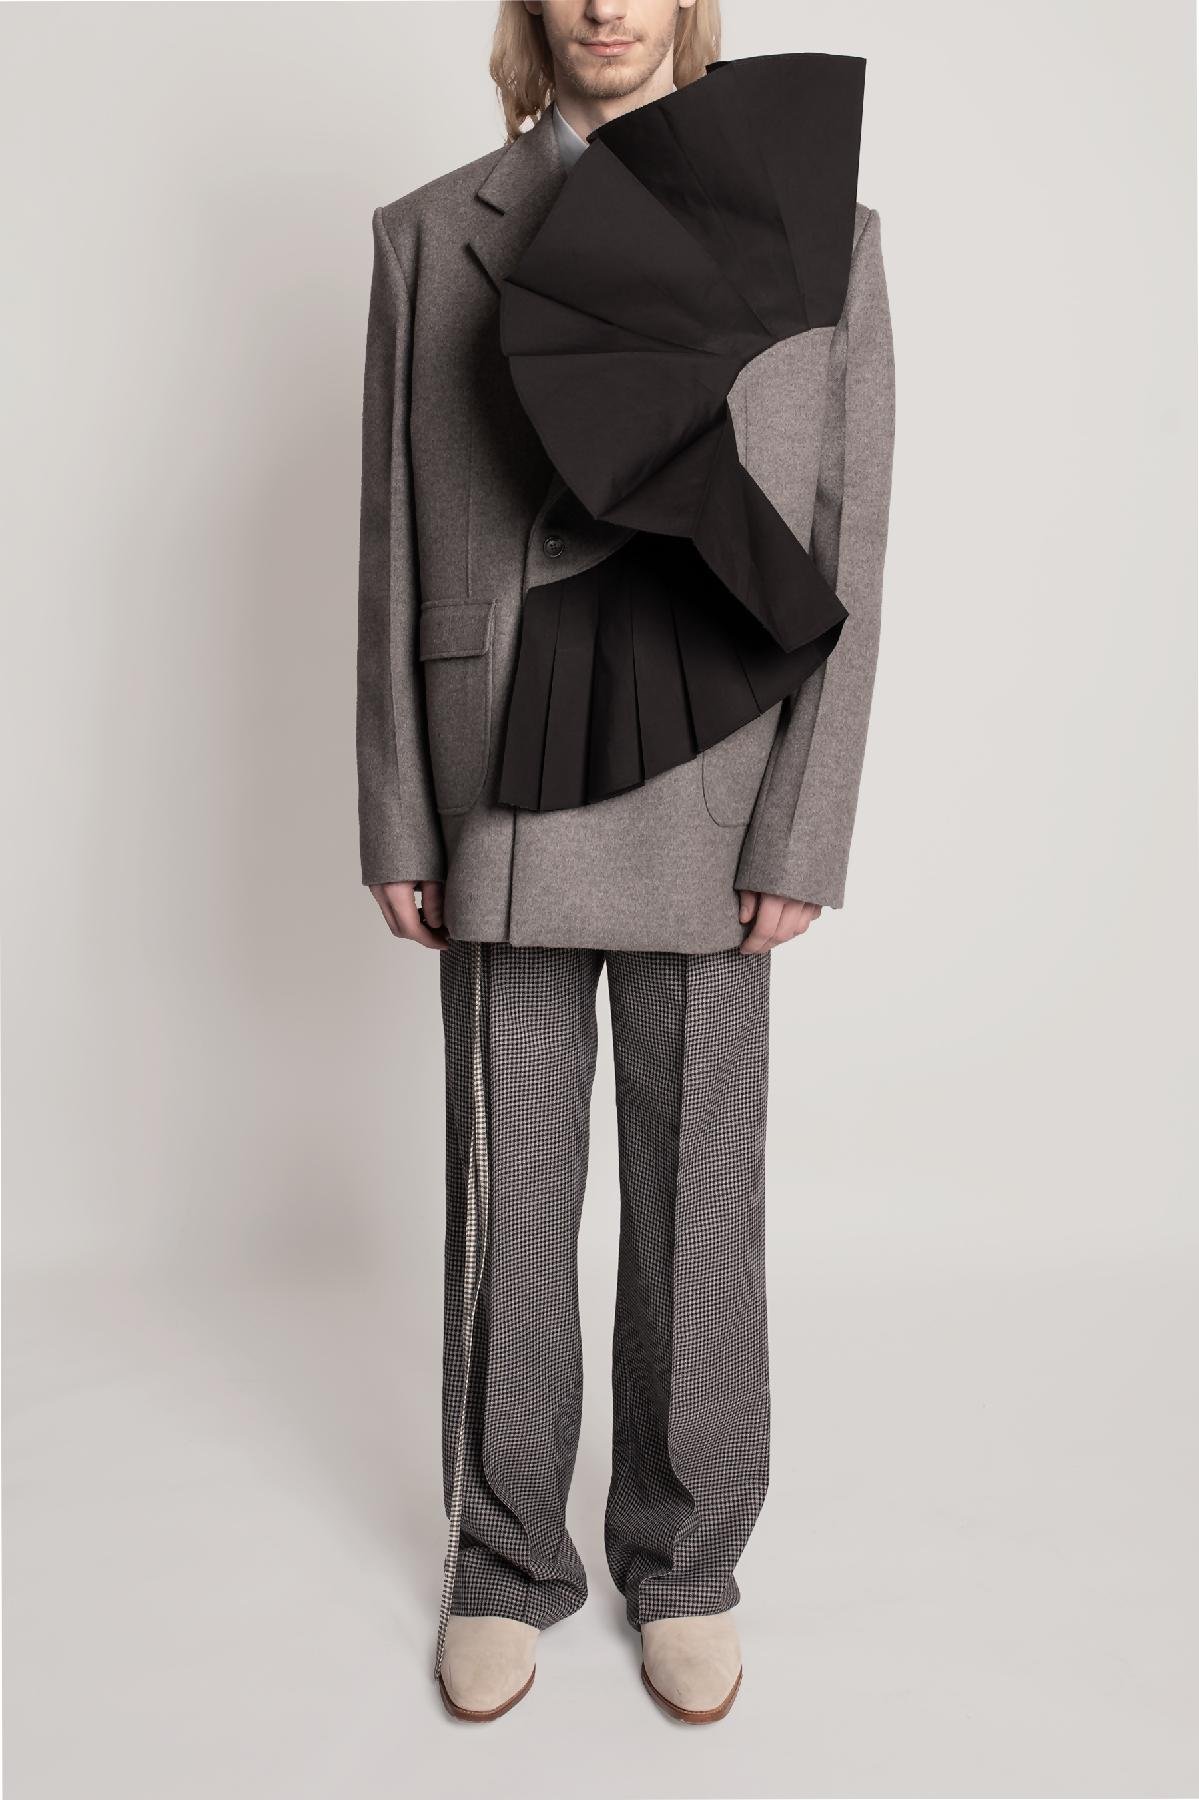 OVER-SIZED DB PLEATED JACKET by KYLE HO